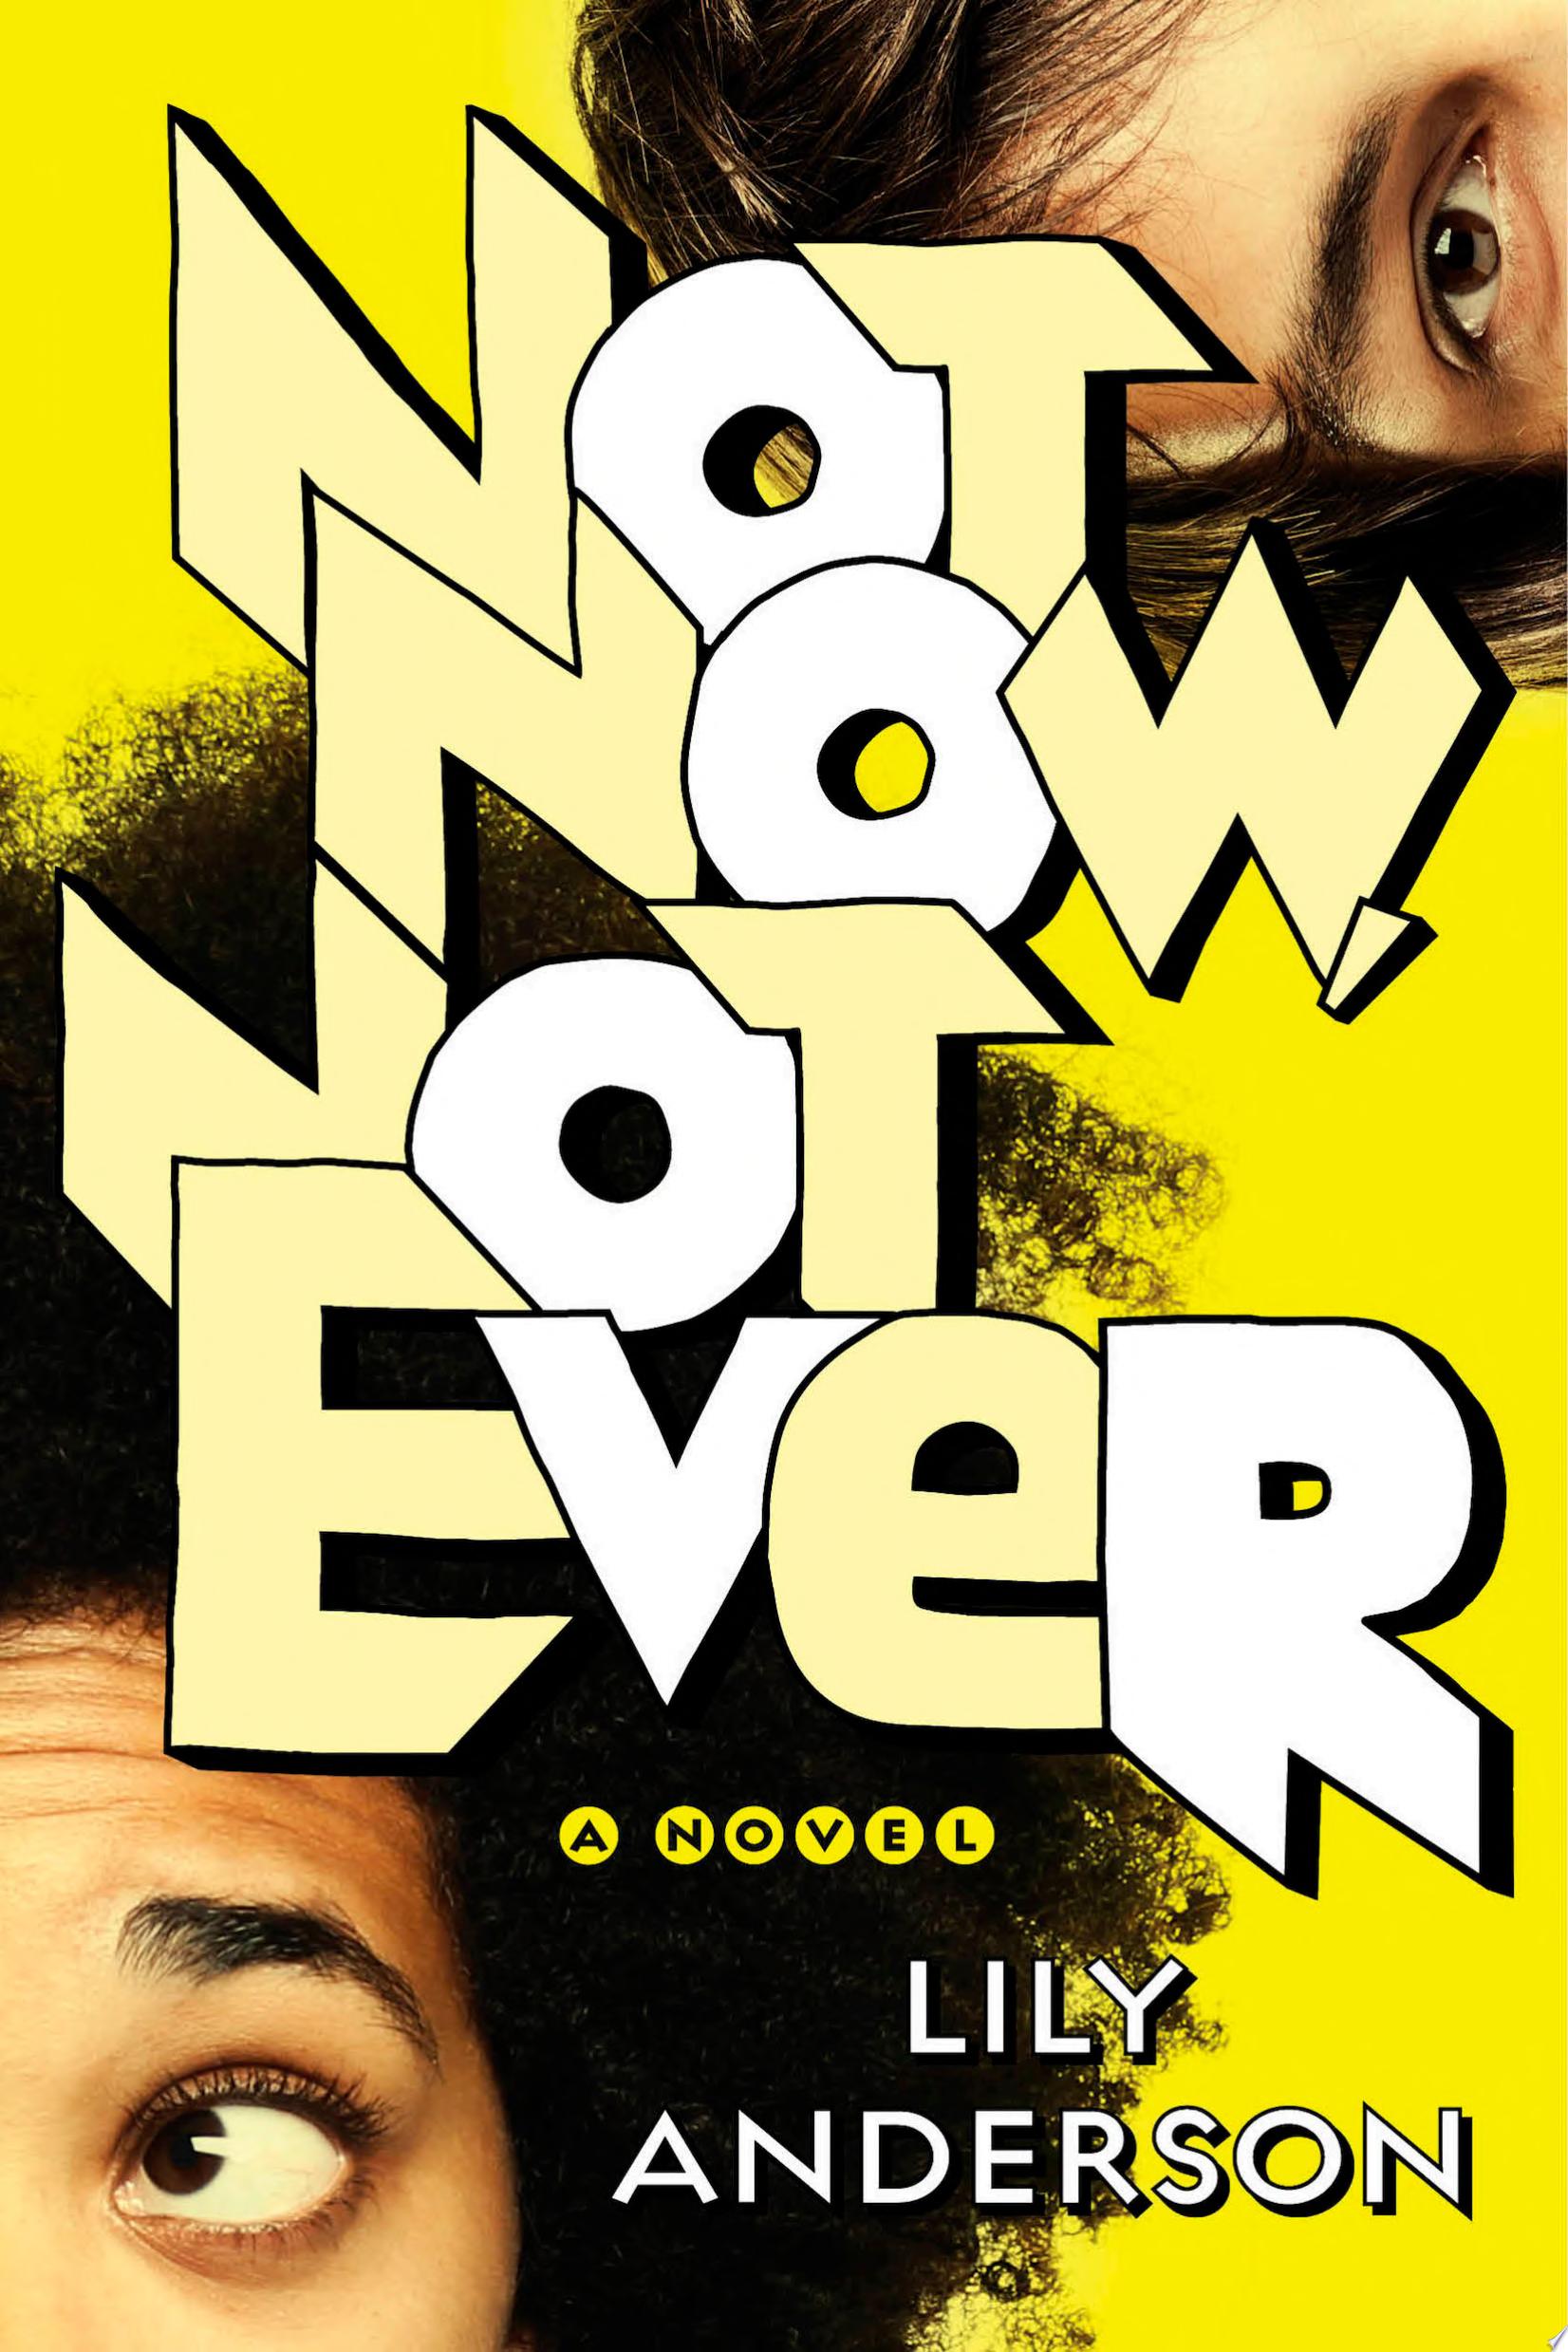 Image for "Not Now, Not Ever"